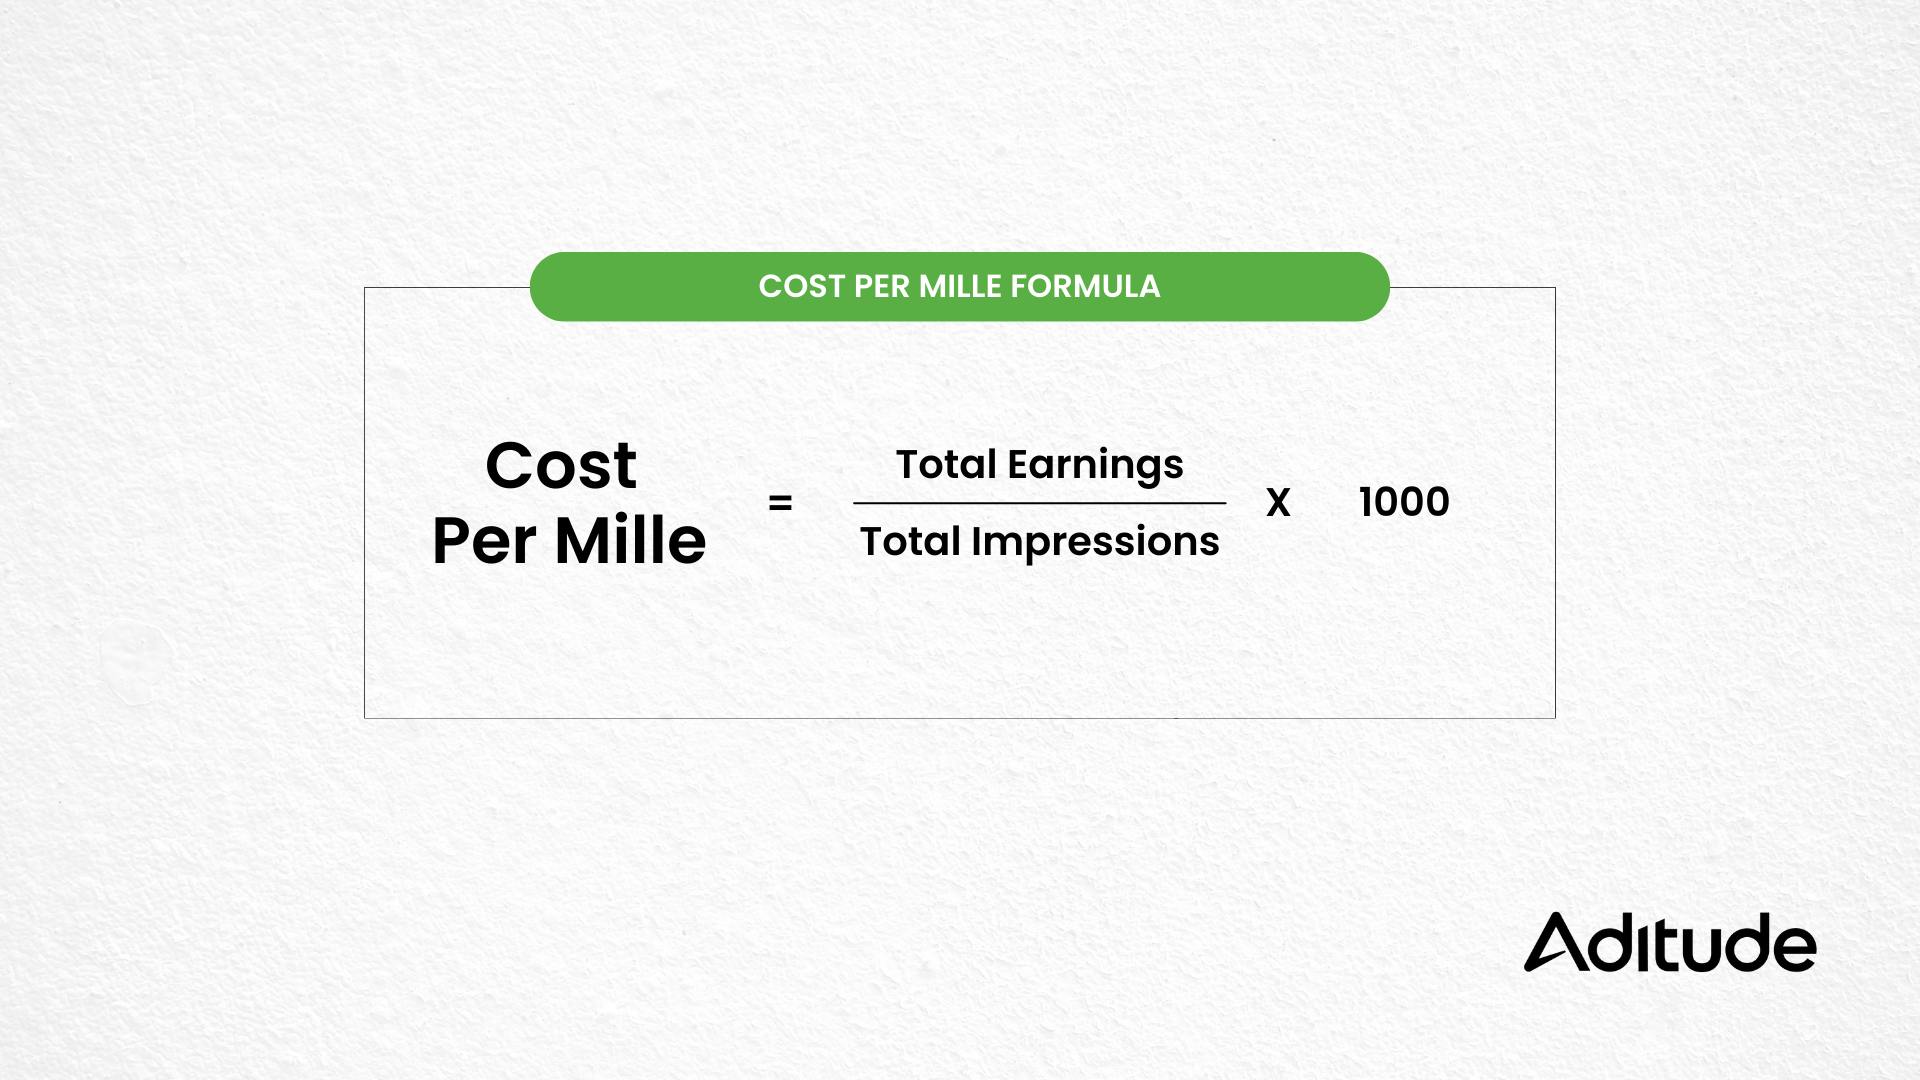 Cost Per Mille equals Total Earnings divided by Total Impressions multiplied by 1000